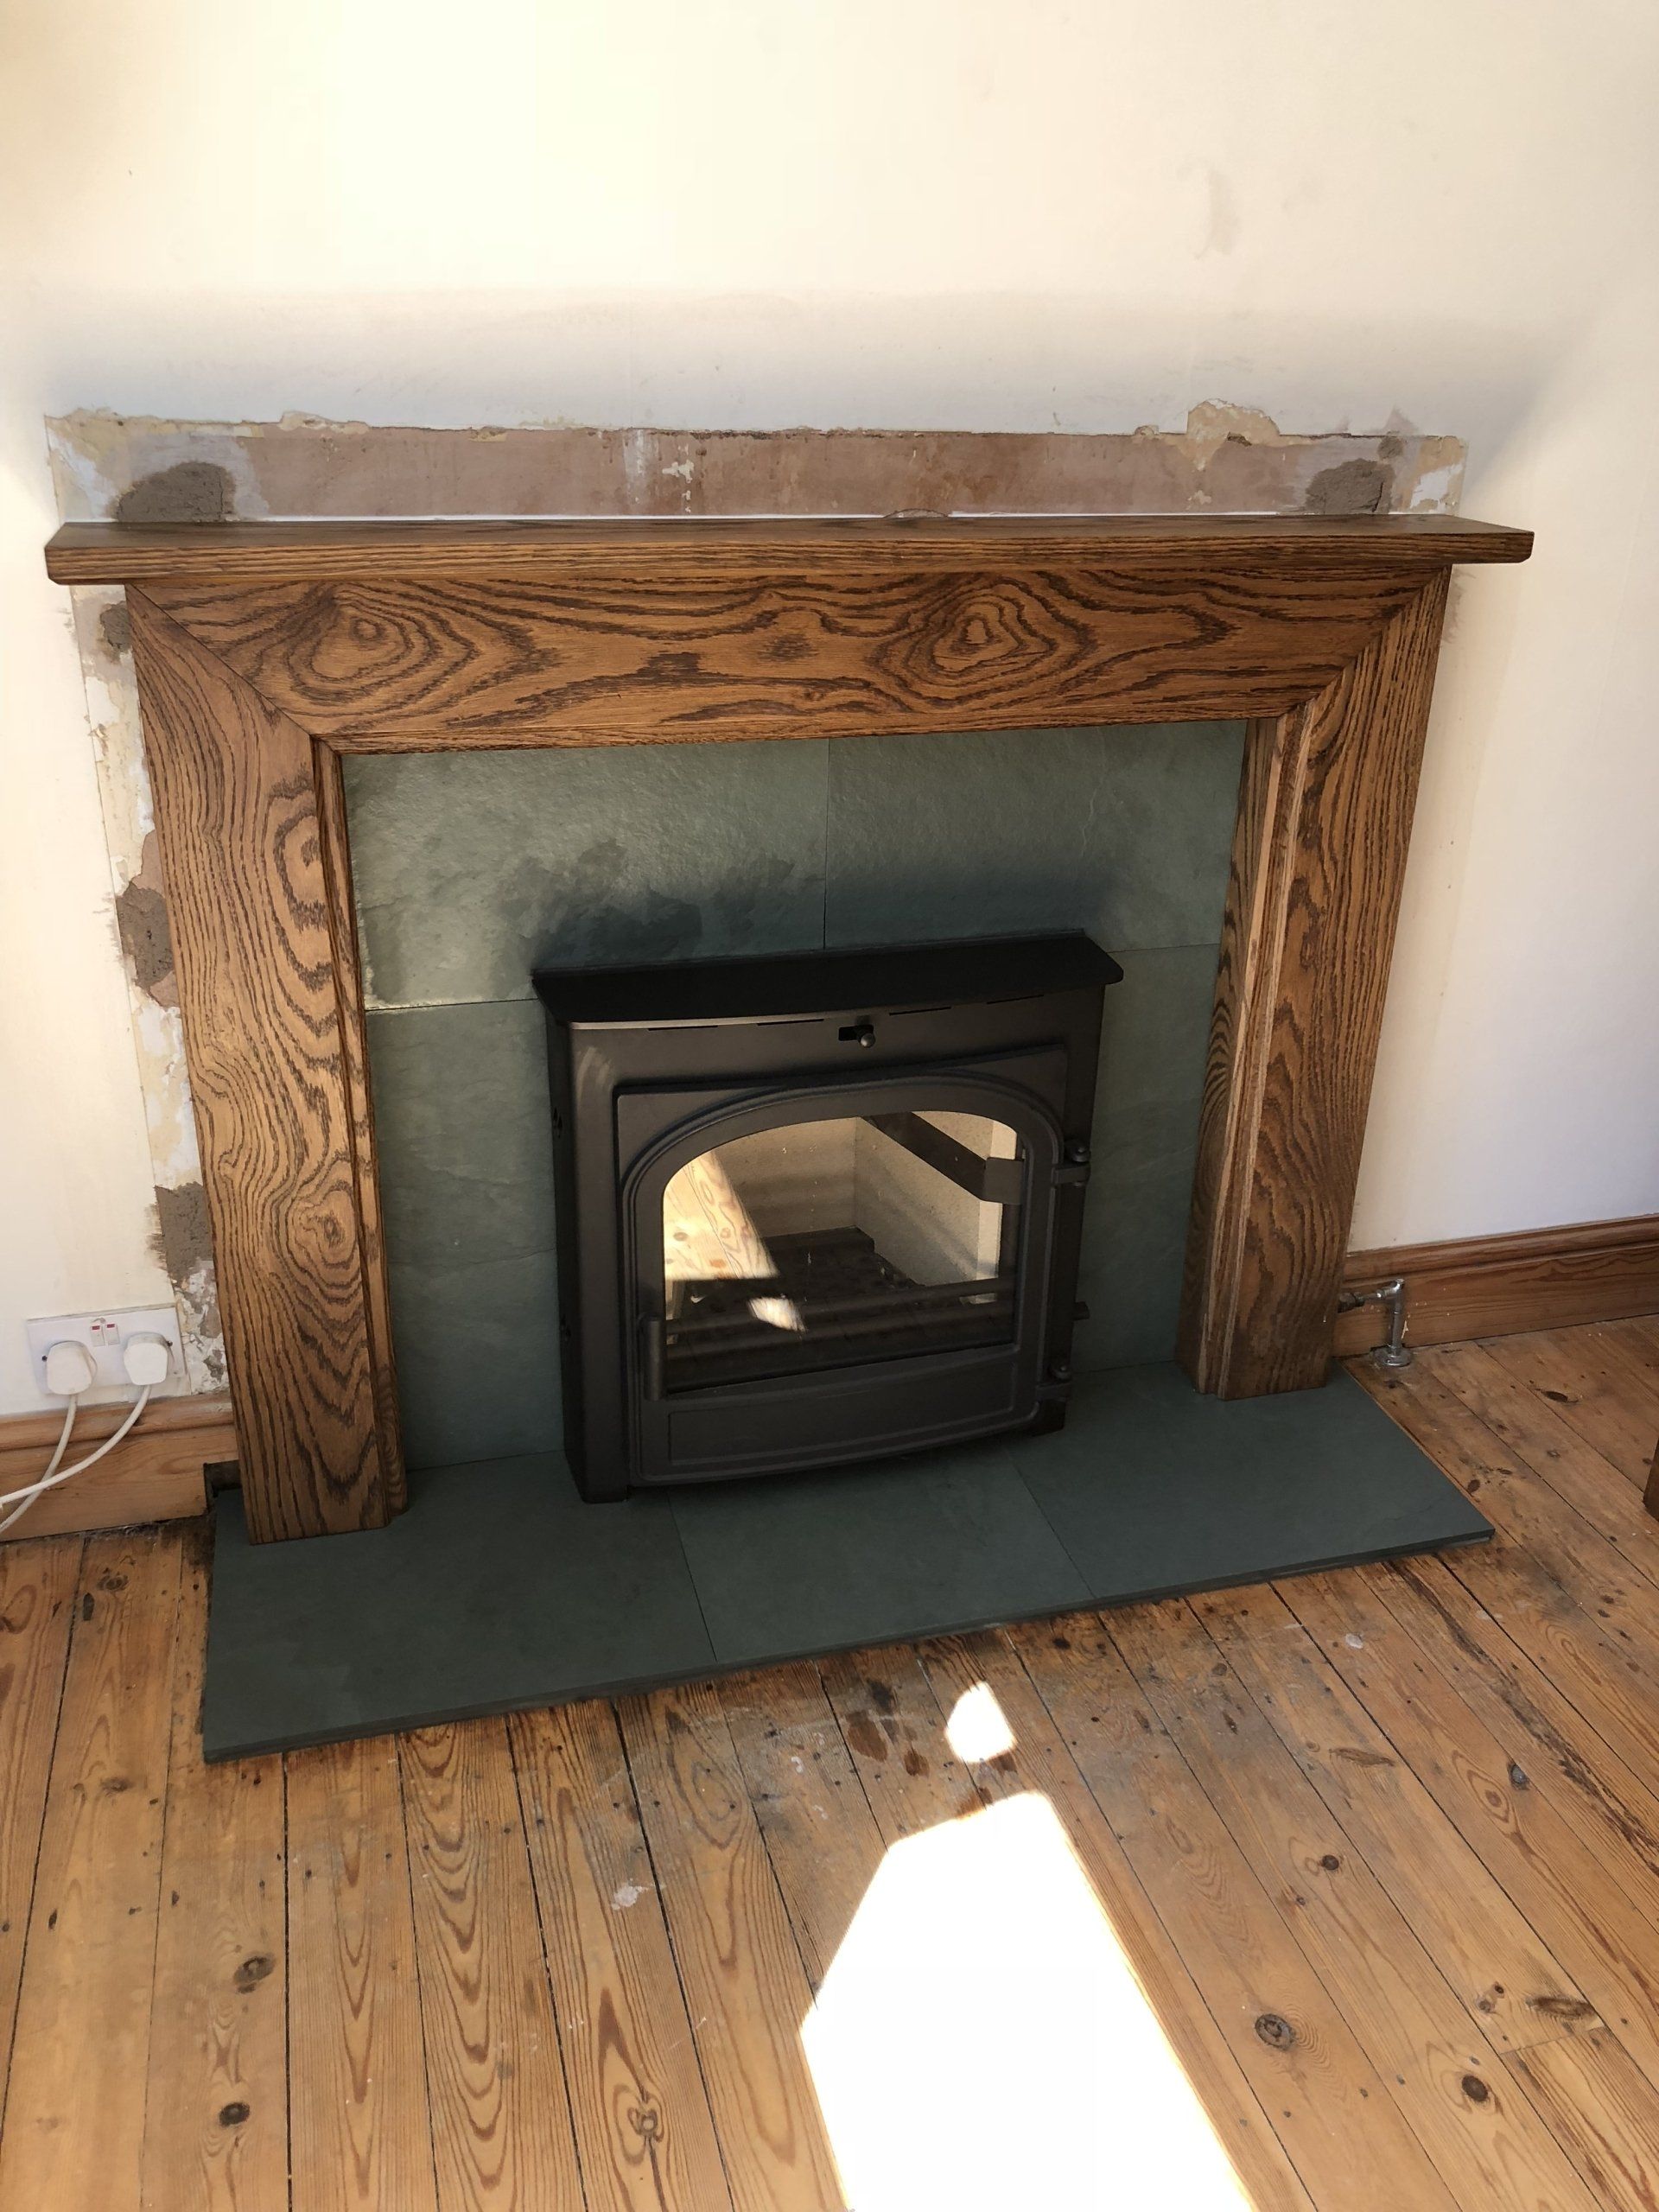 Herald Telford 5 traditional multi fuel stove in wood surround and green slate slips